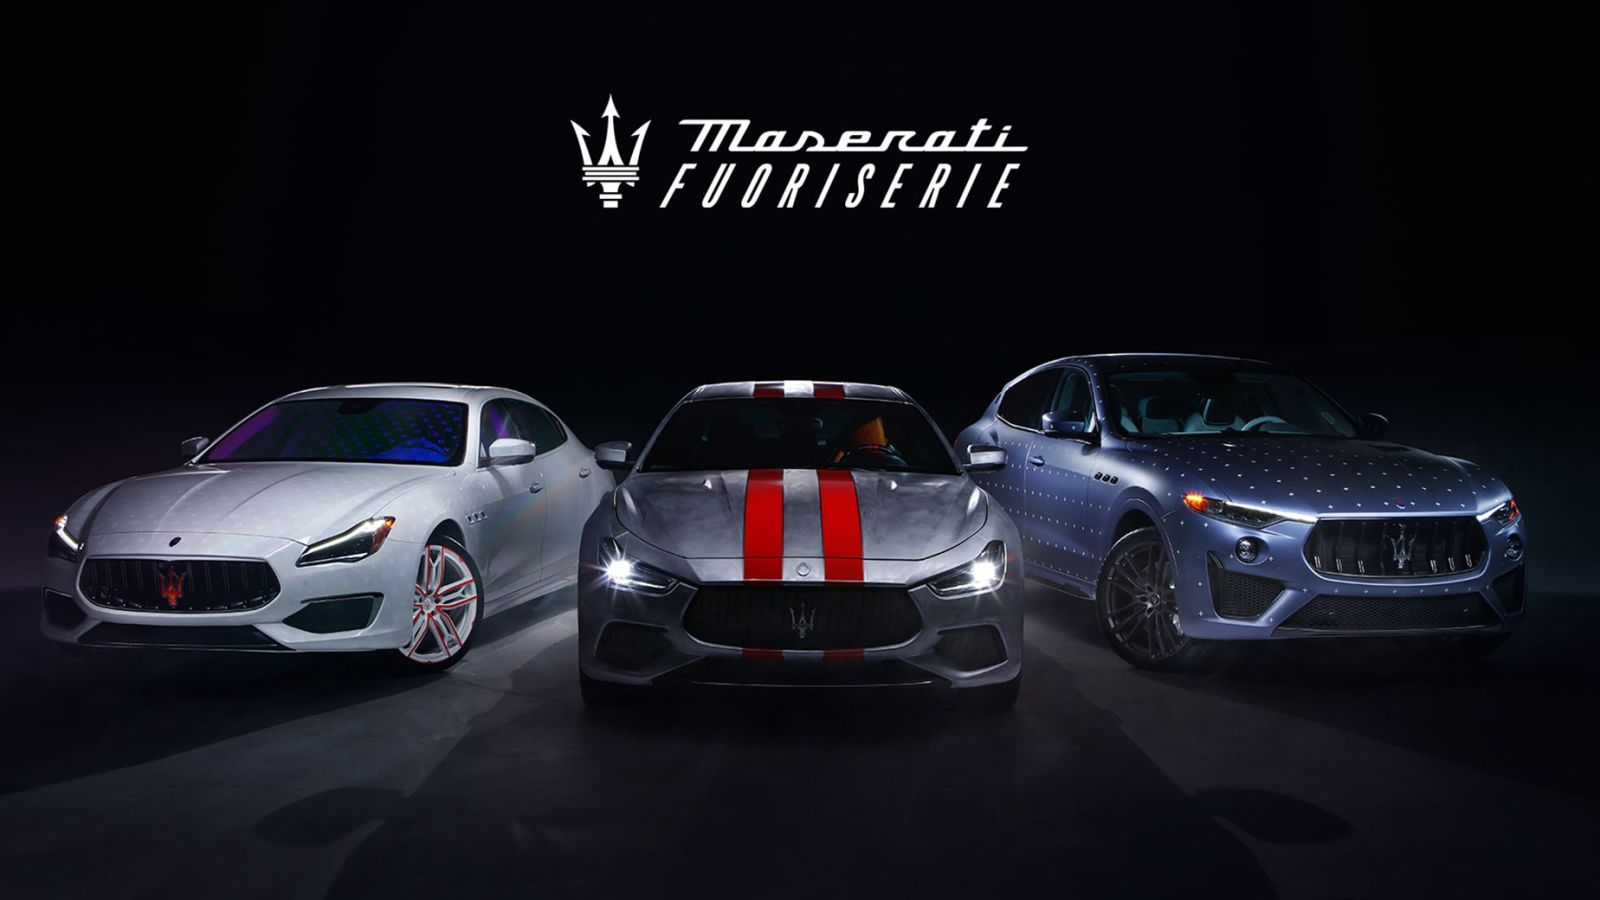 Illustration for article titled Maserati has a new line of exclusive finishes for their cars